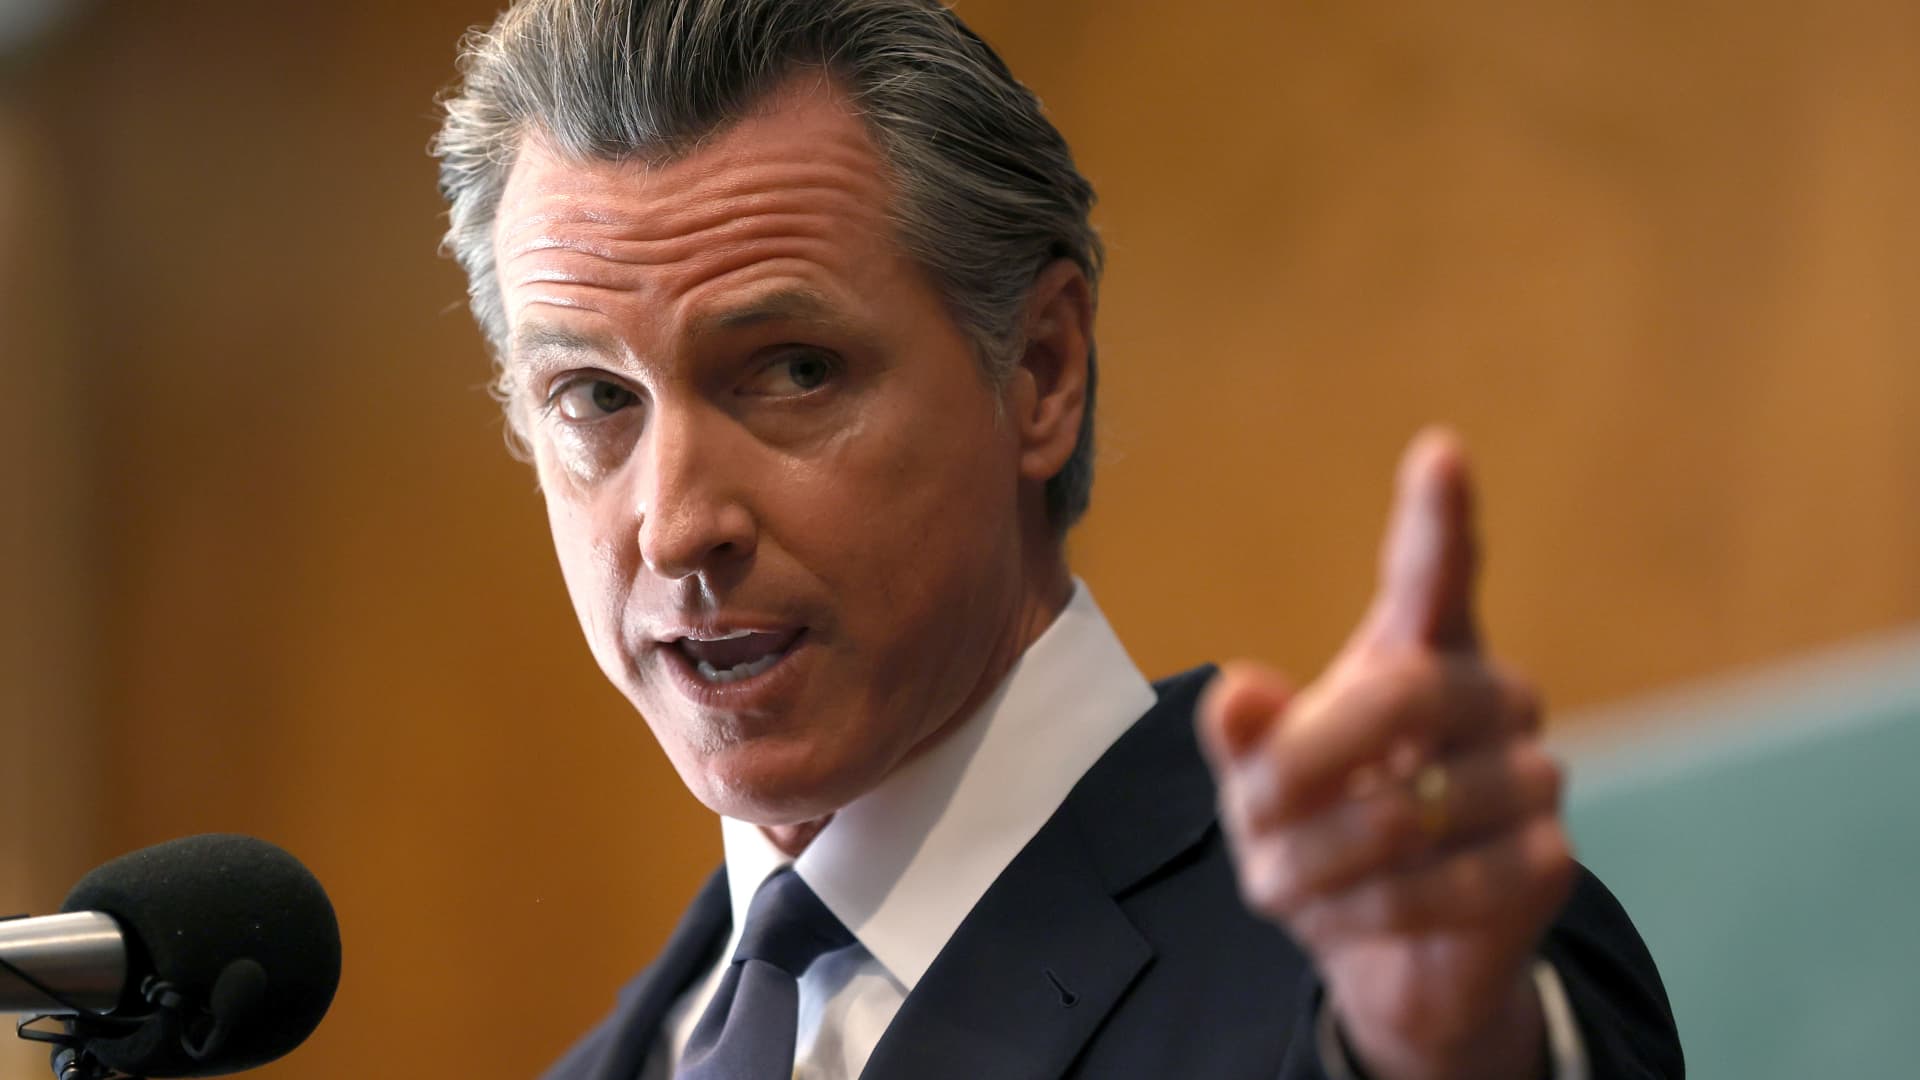 California governor says state won't do business with Walgreens over position on abortion pill